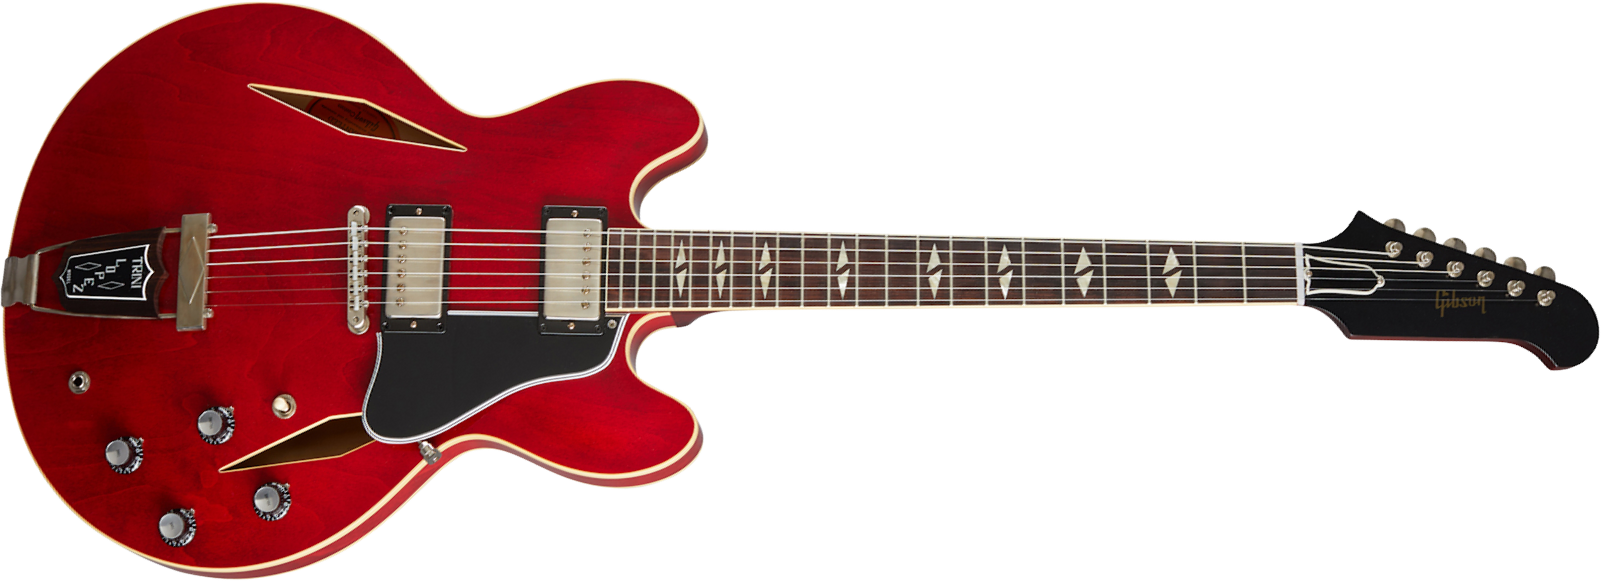 Gibson Custom Shop Trini Lopez Standard 1964 Reissue 2h Ht Rw - Vos Sixties Cherry - Semi-hollow electric guitar - Main picture